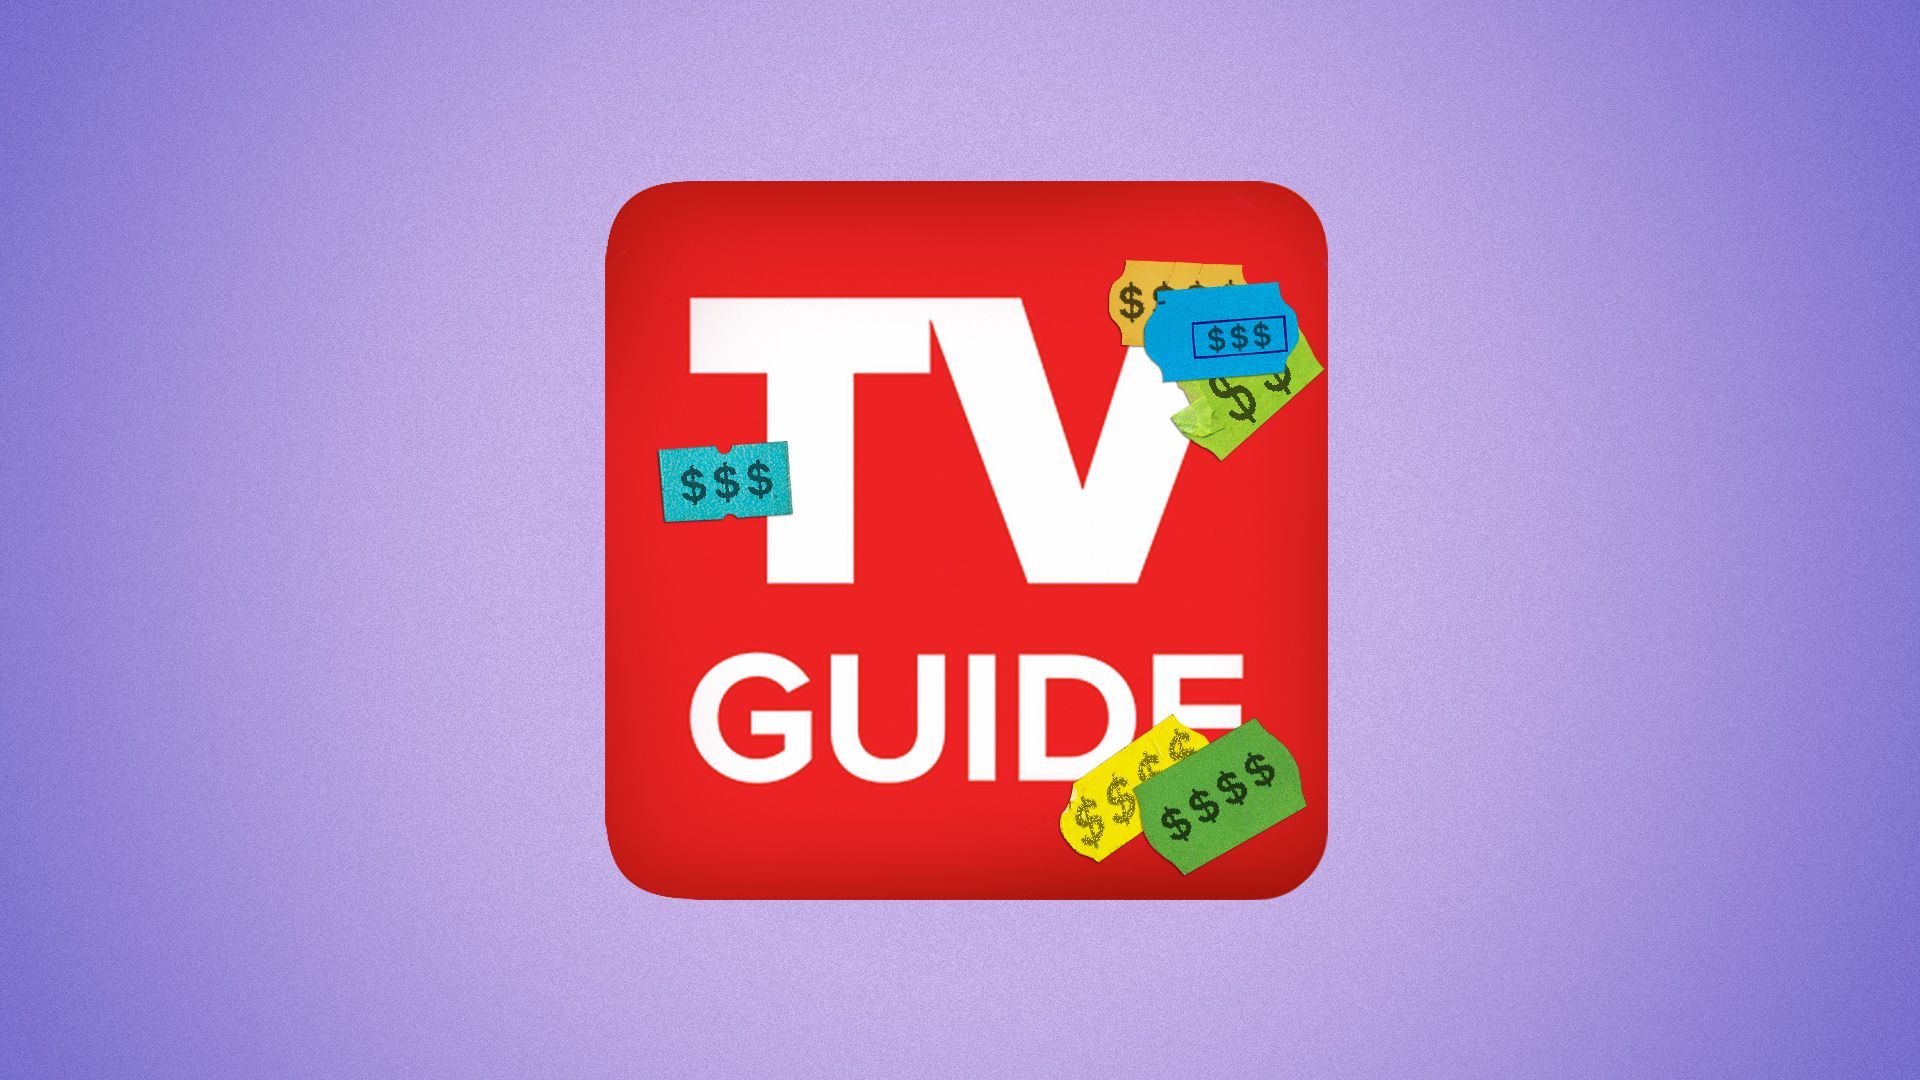 Illustration of the TV Guide logo with multiple price stickers all over it. 